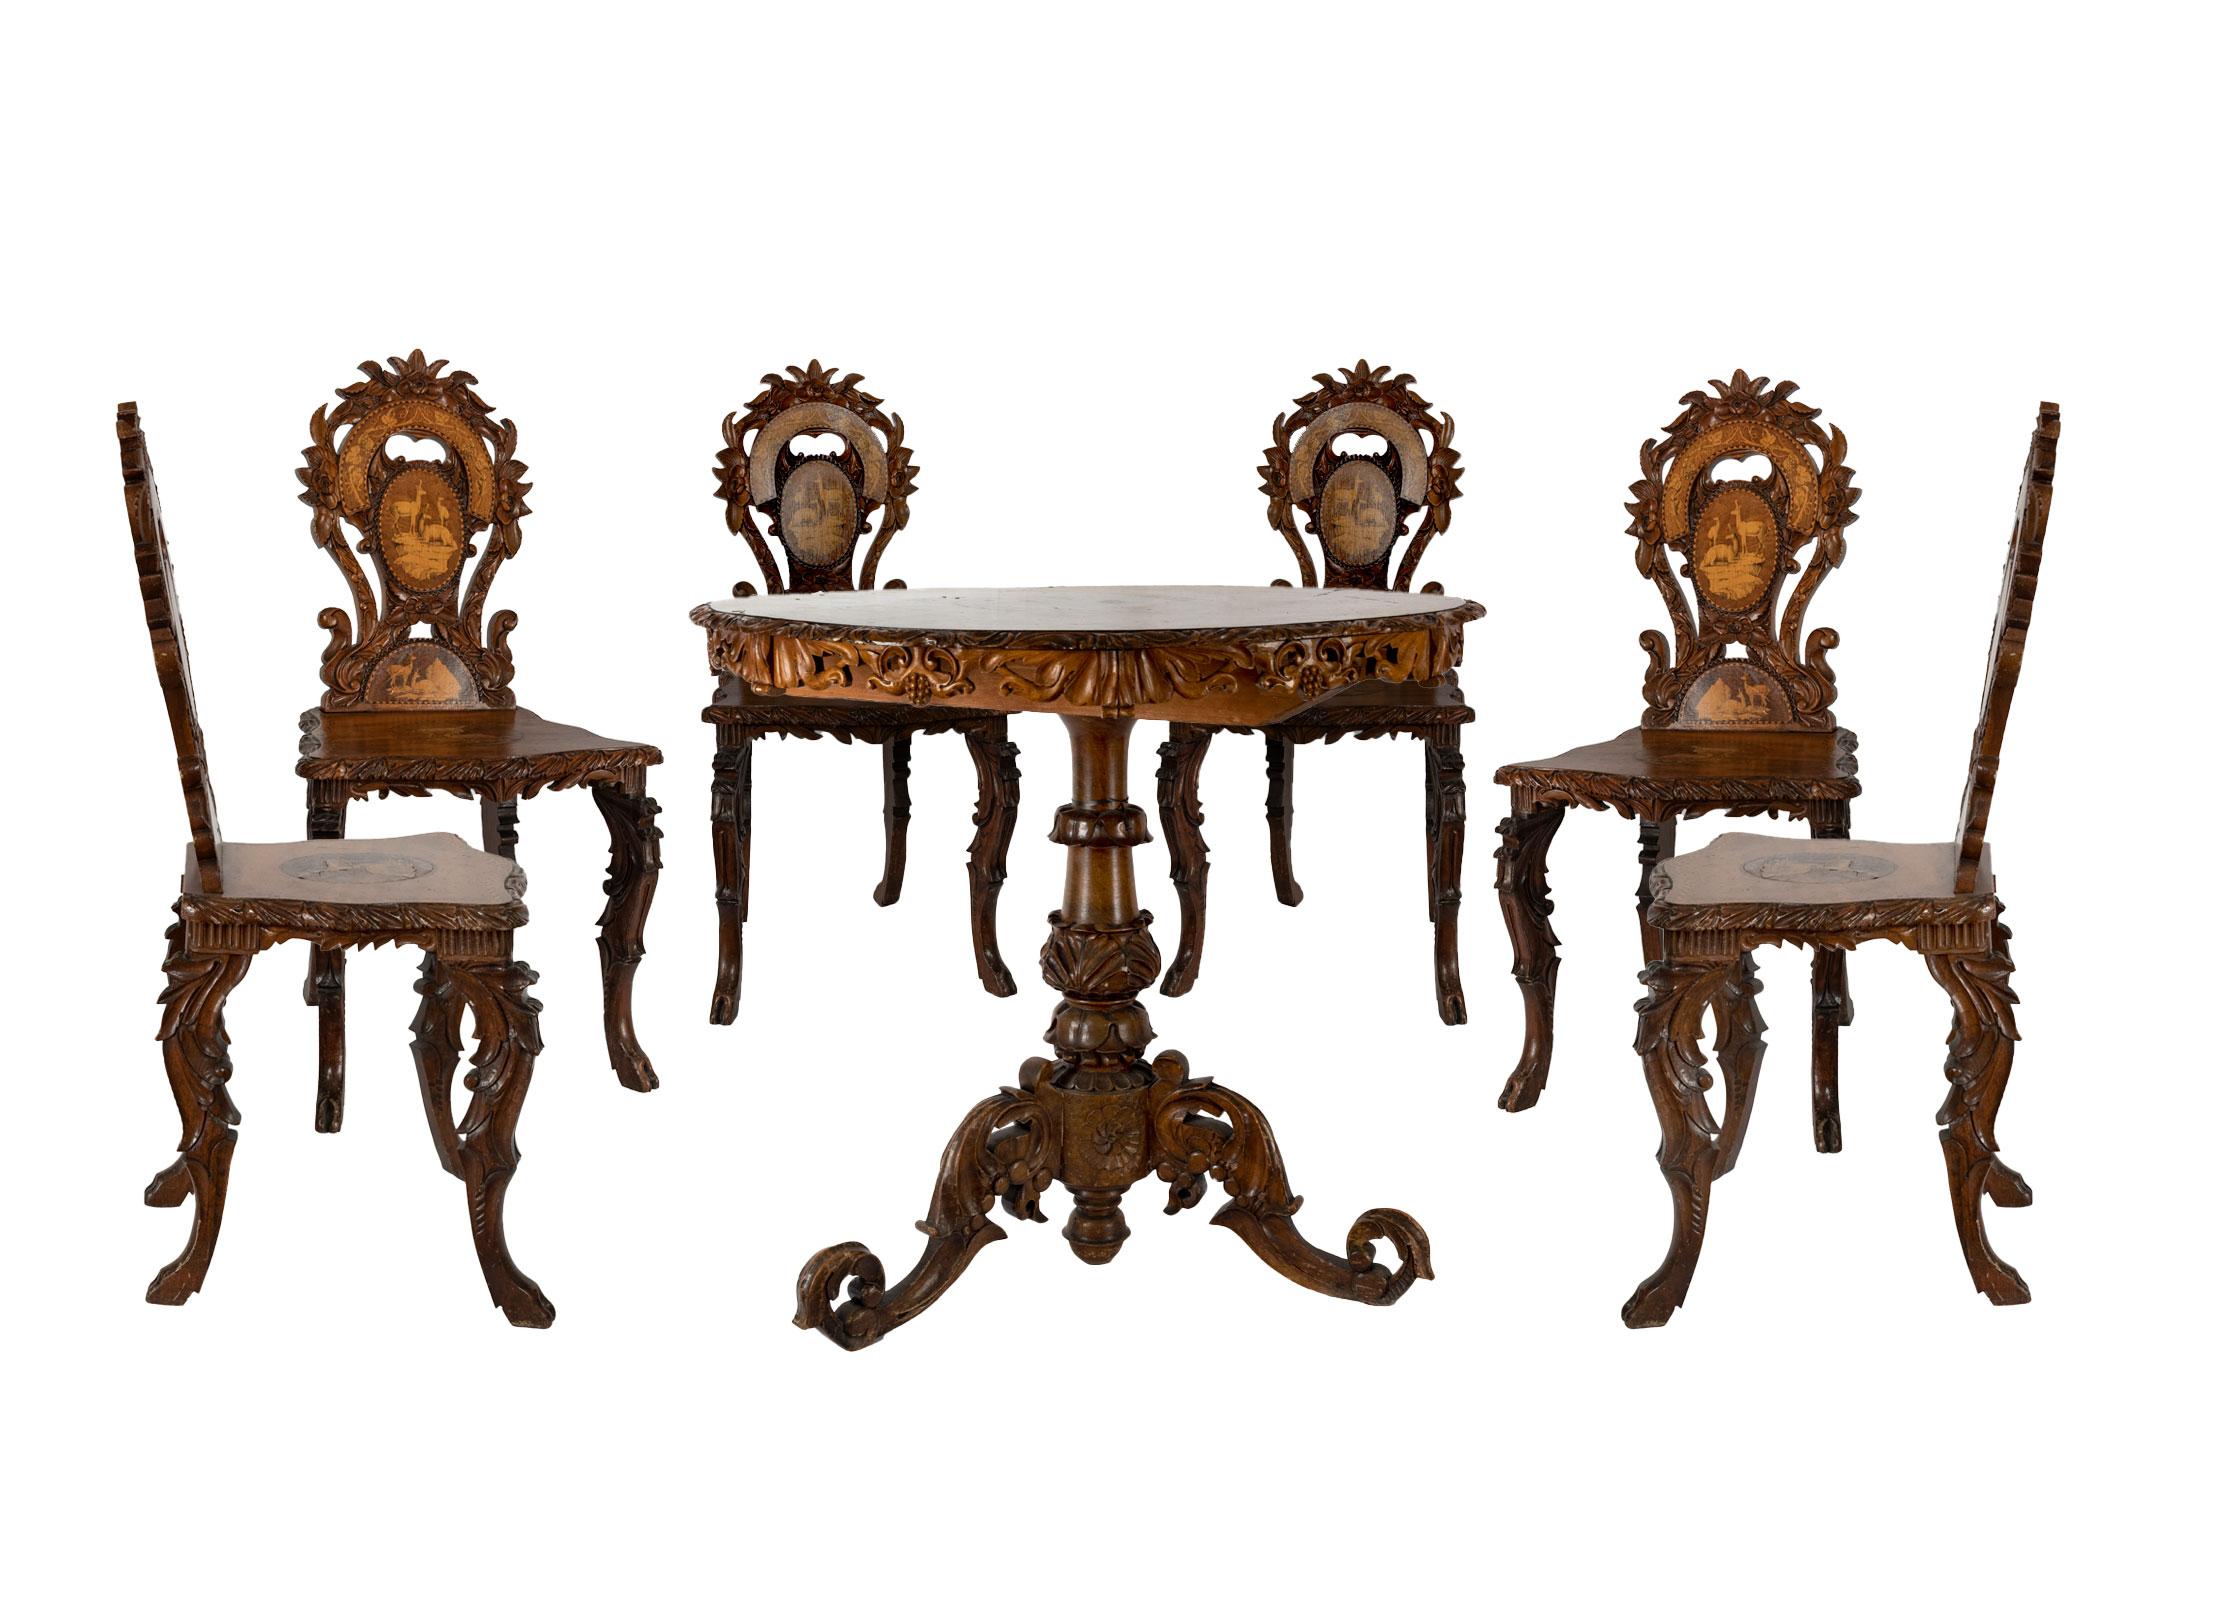 An ornately carved inlaid Swiss black forest table and chair set. The round tilt-table is inlaid with a centre medallion depicting a hunting scene and is surrounded by eight smaller inlaid goat-scene oval medallions, with a piered foliate apron, the